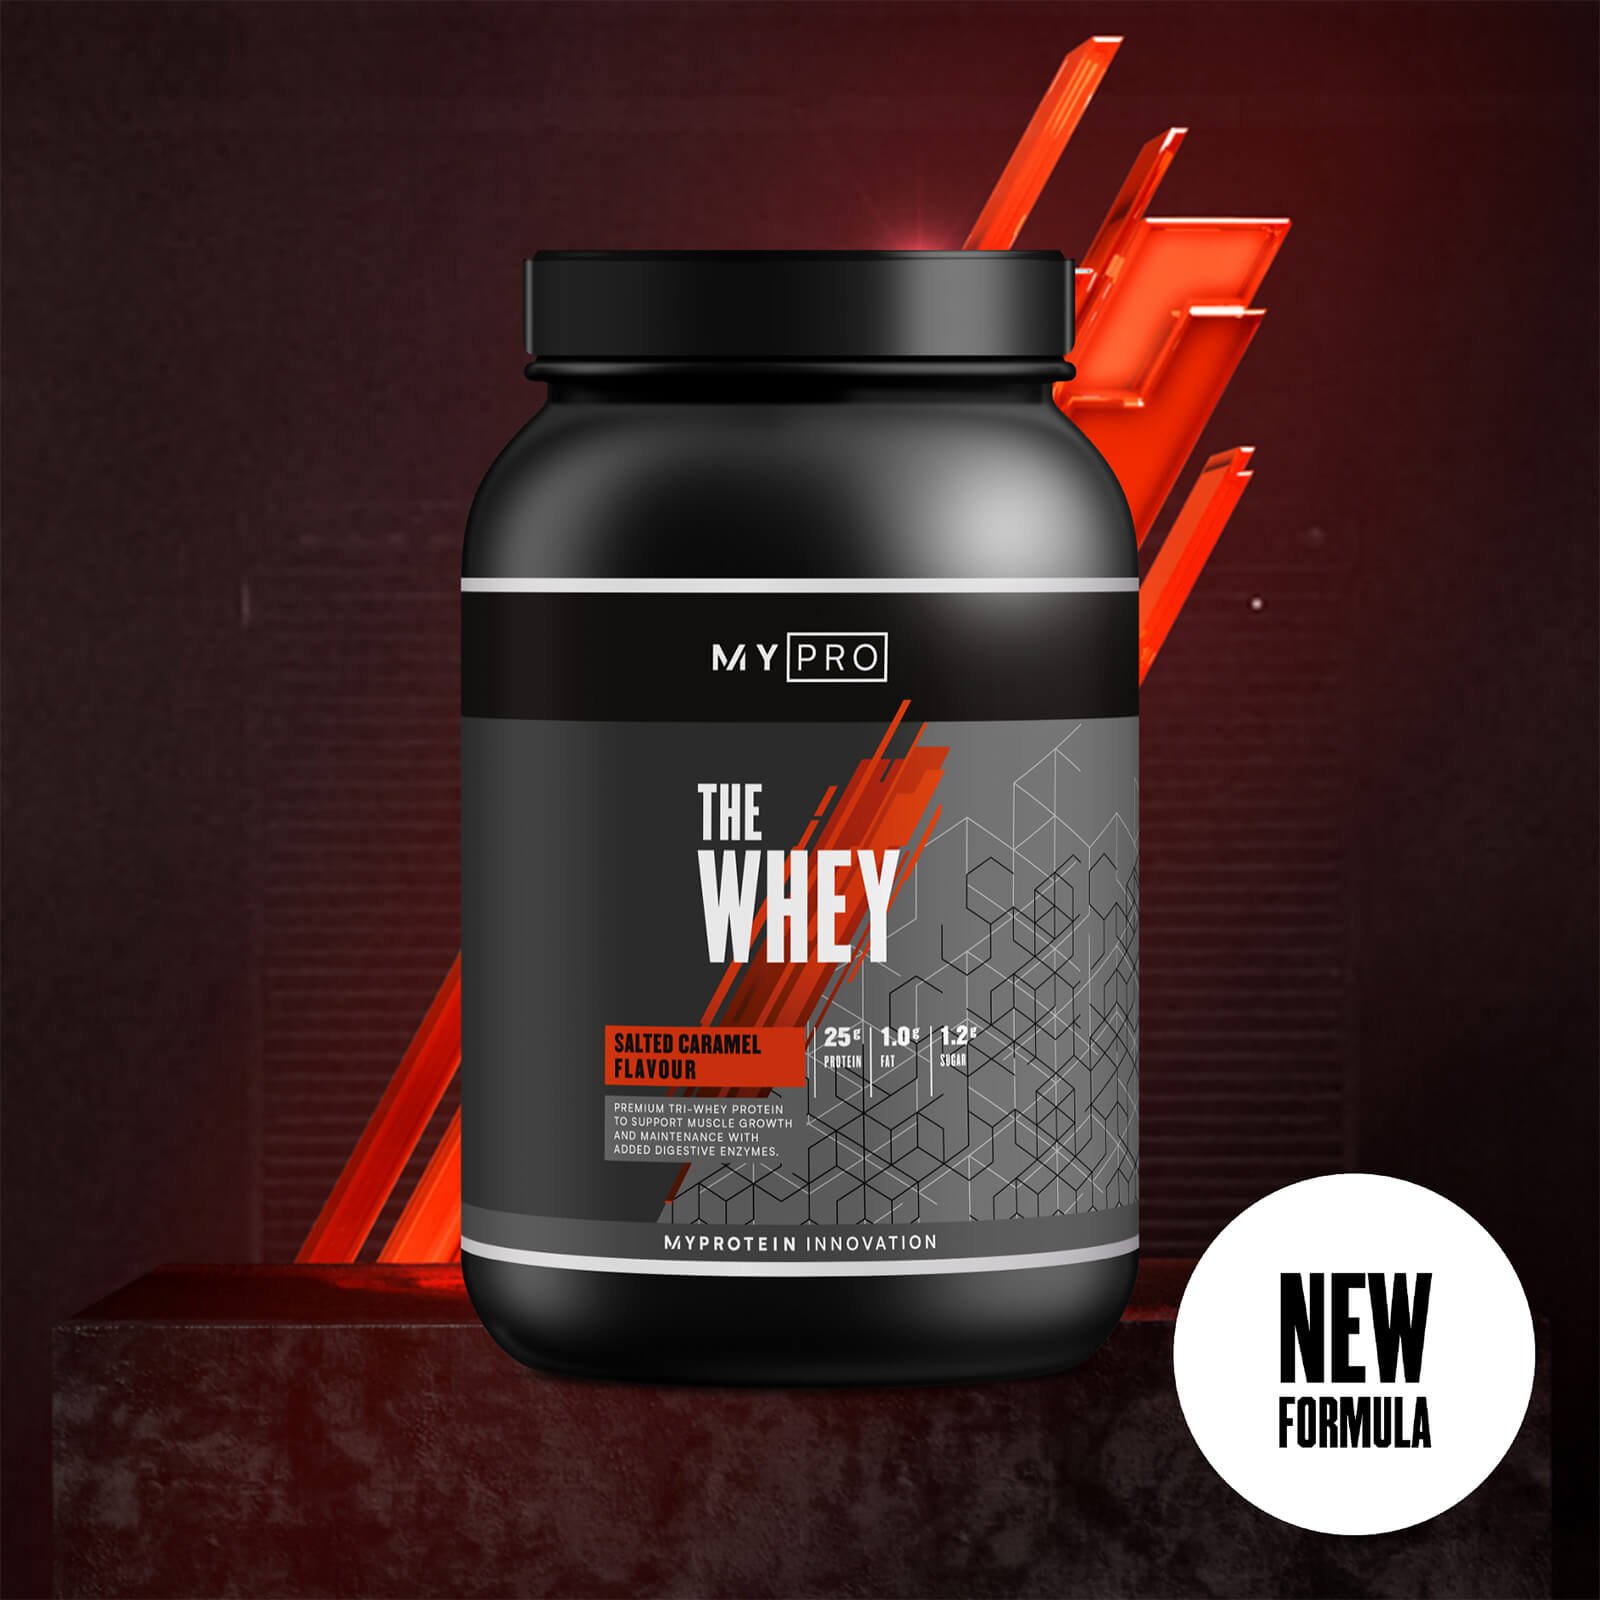 Myprotein THE Whey - 60servings - Salted Caramel